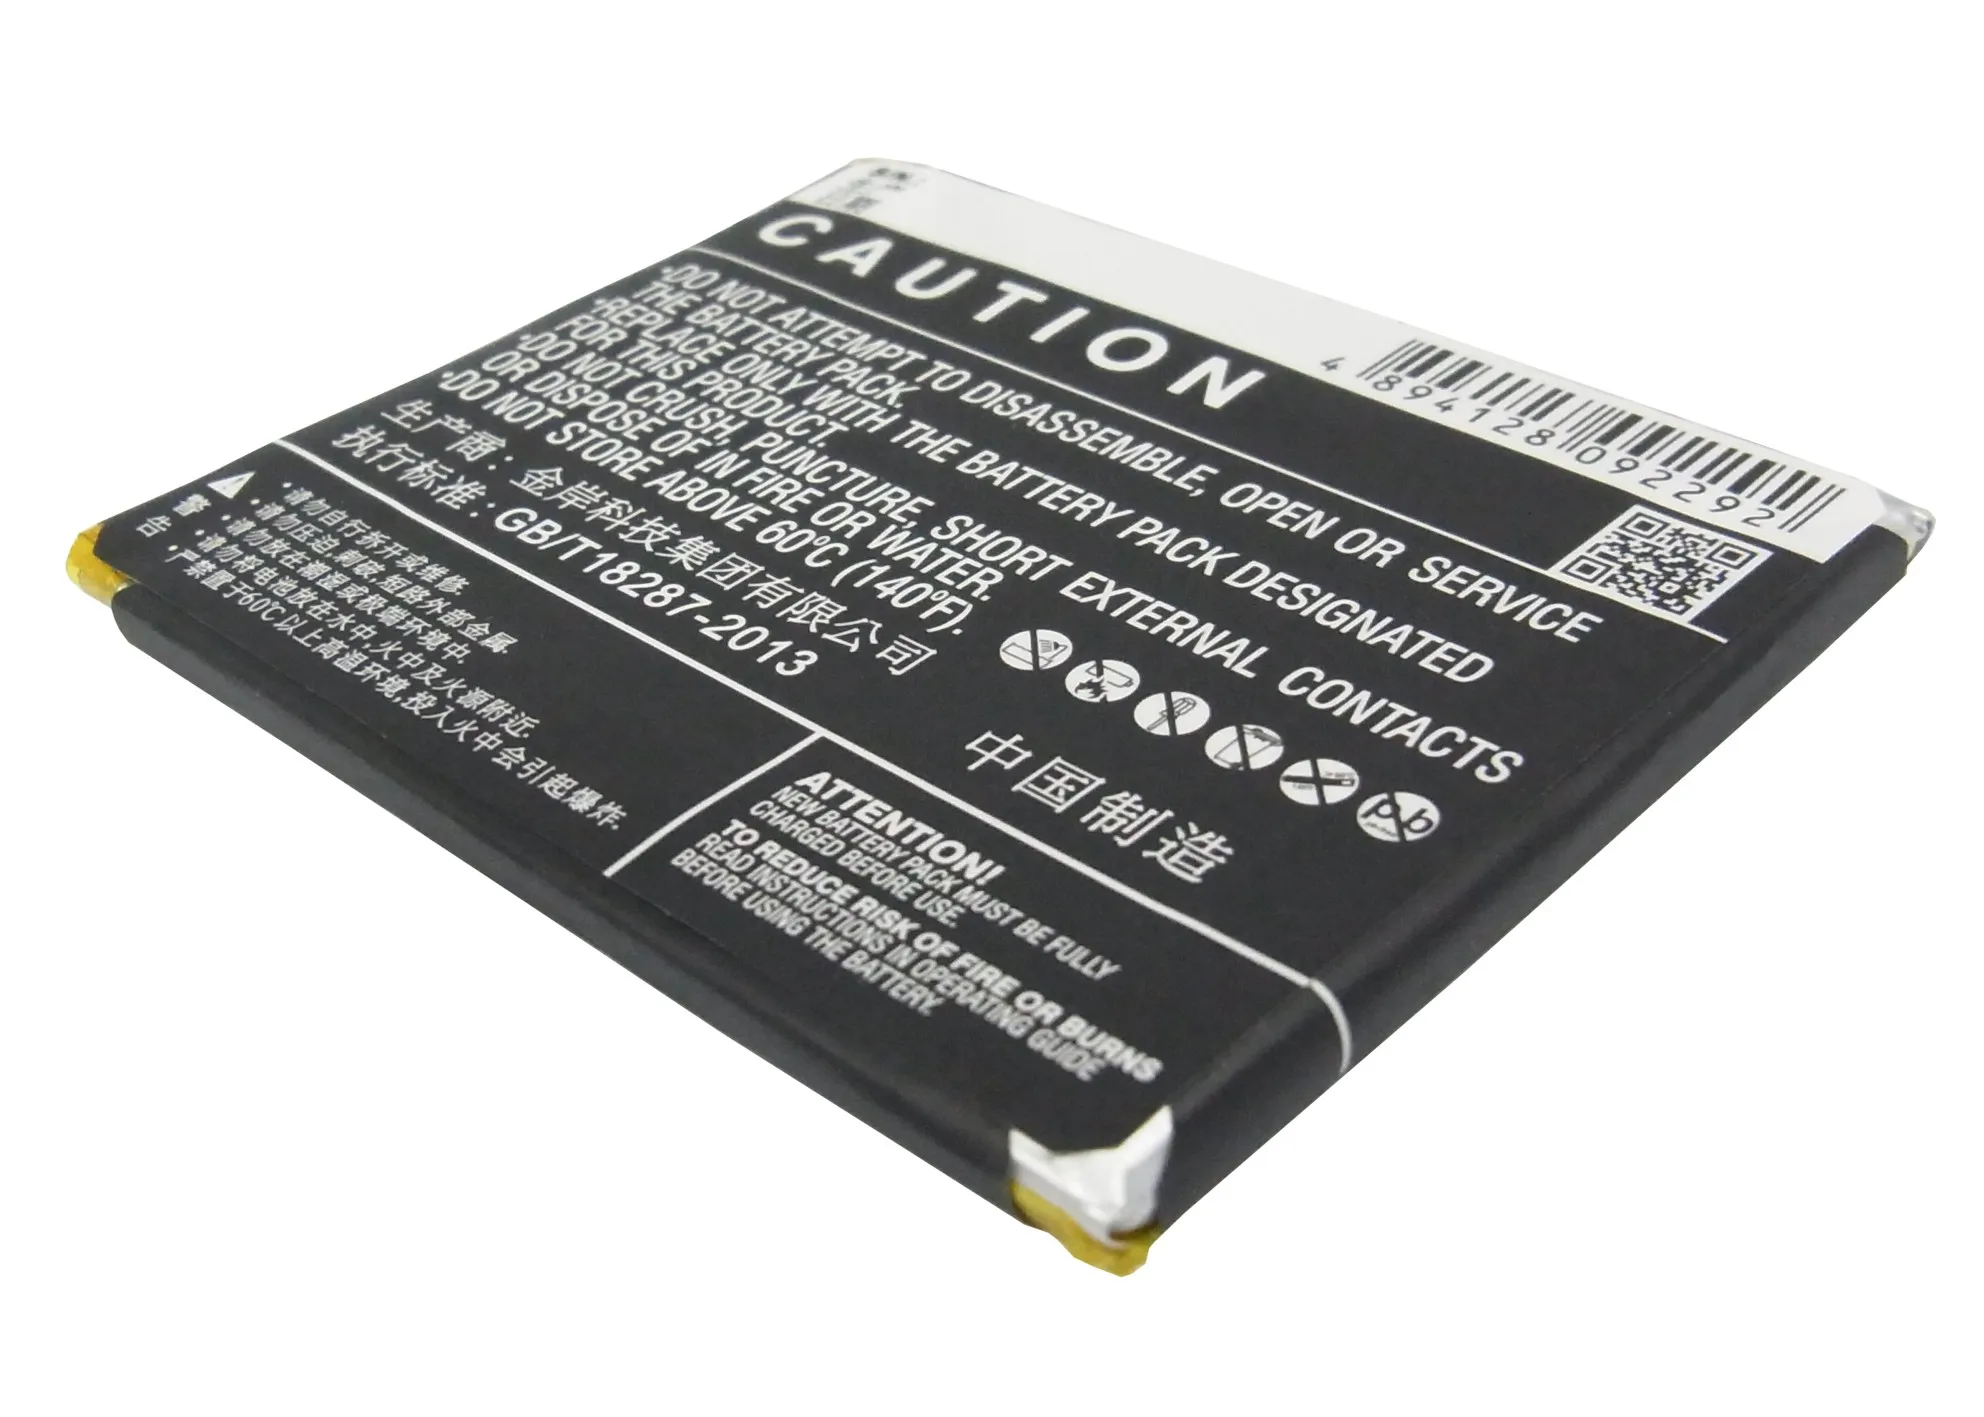 Cameron Sino 2100mAh Battery BL-N2100 for GIONEE GN706, GN706L